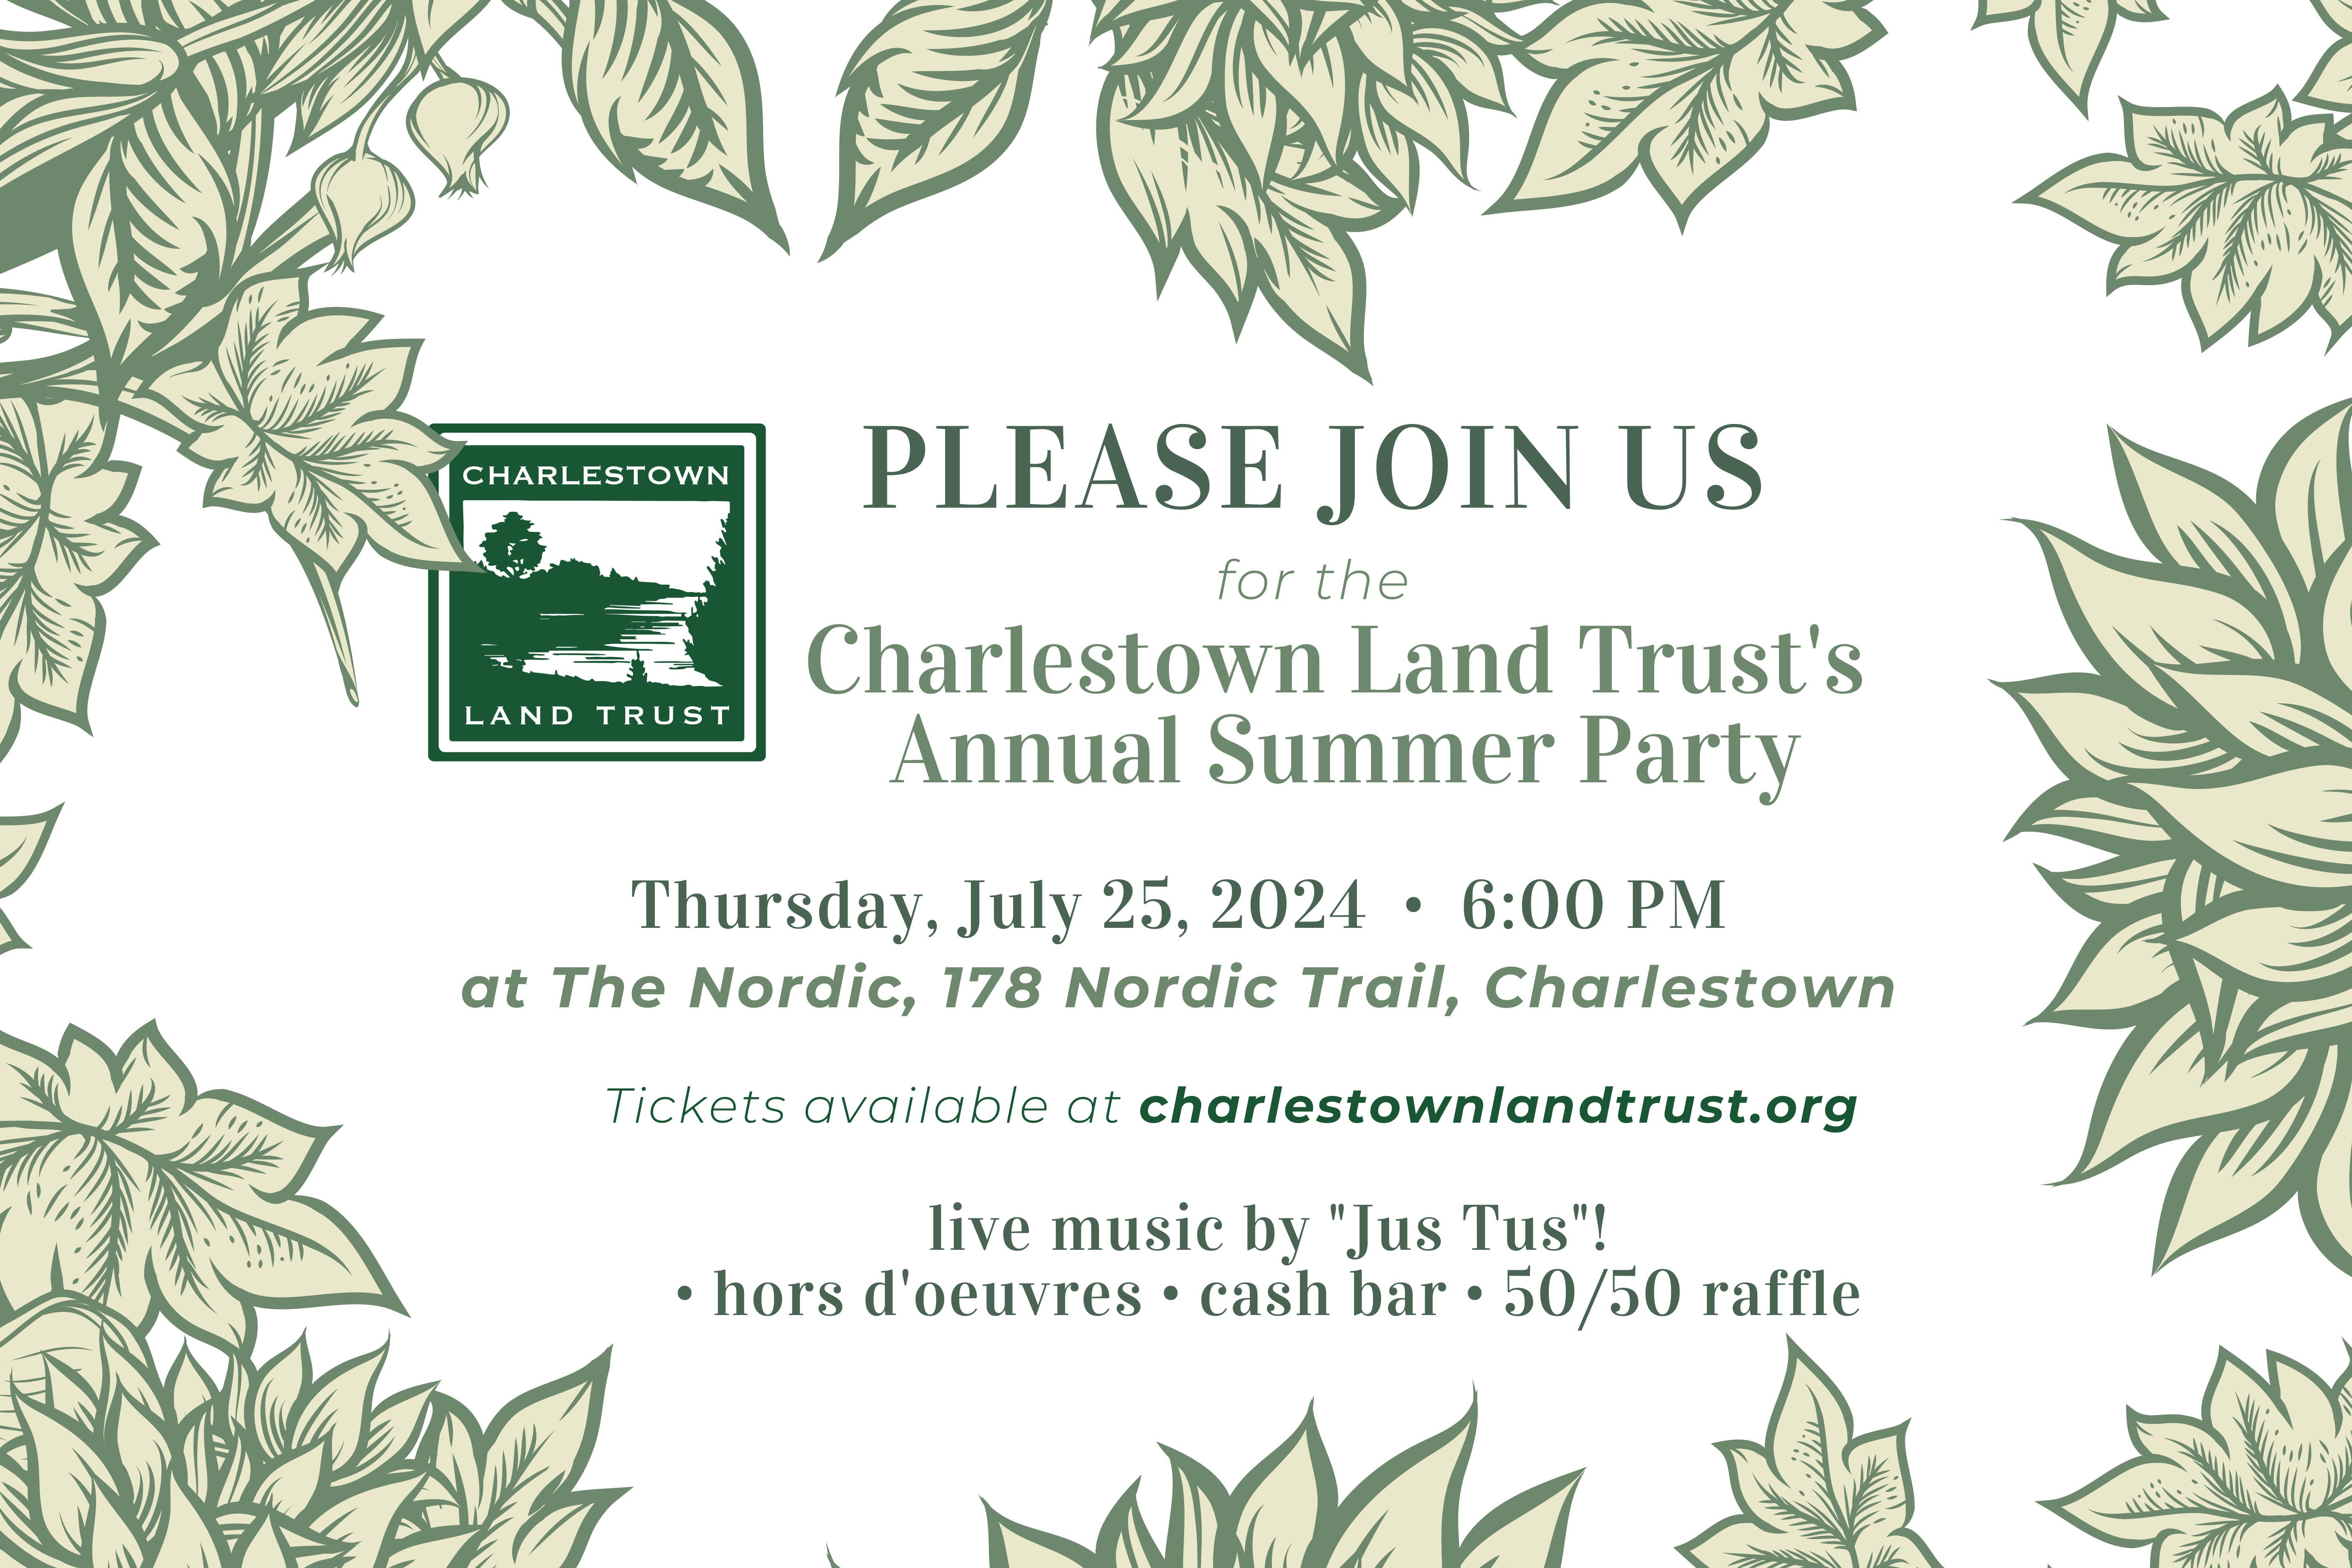 Charlestown Land Trust's Annual Summer Party